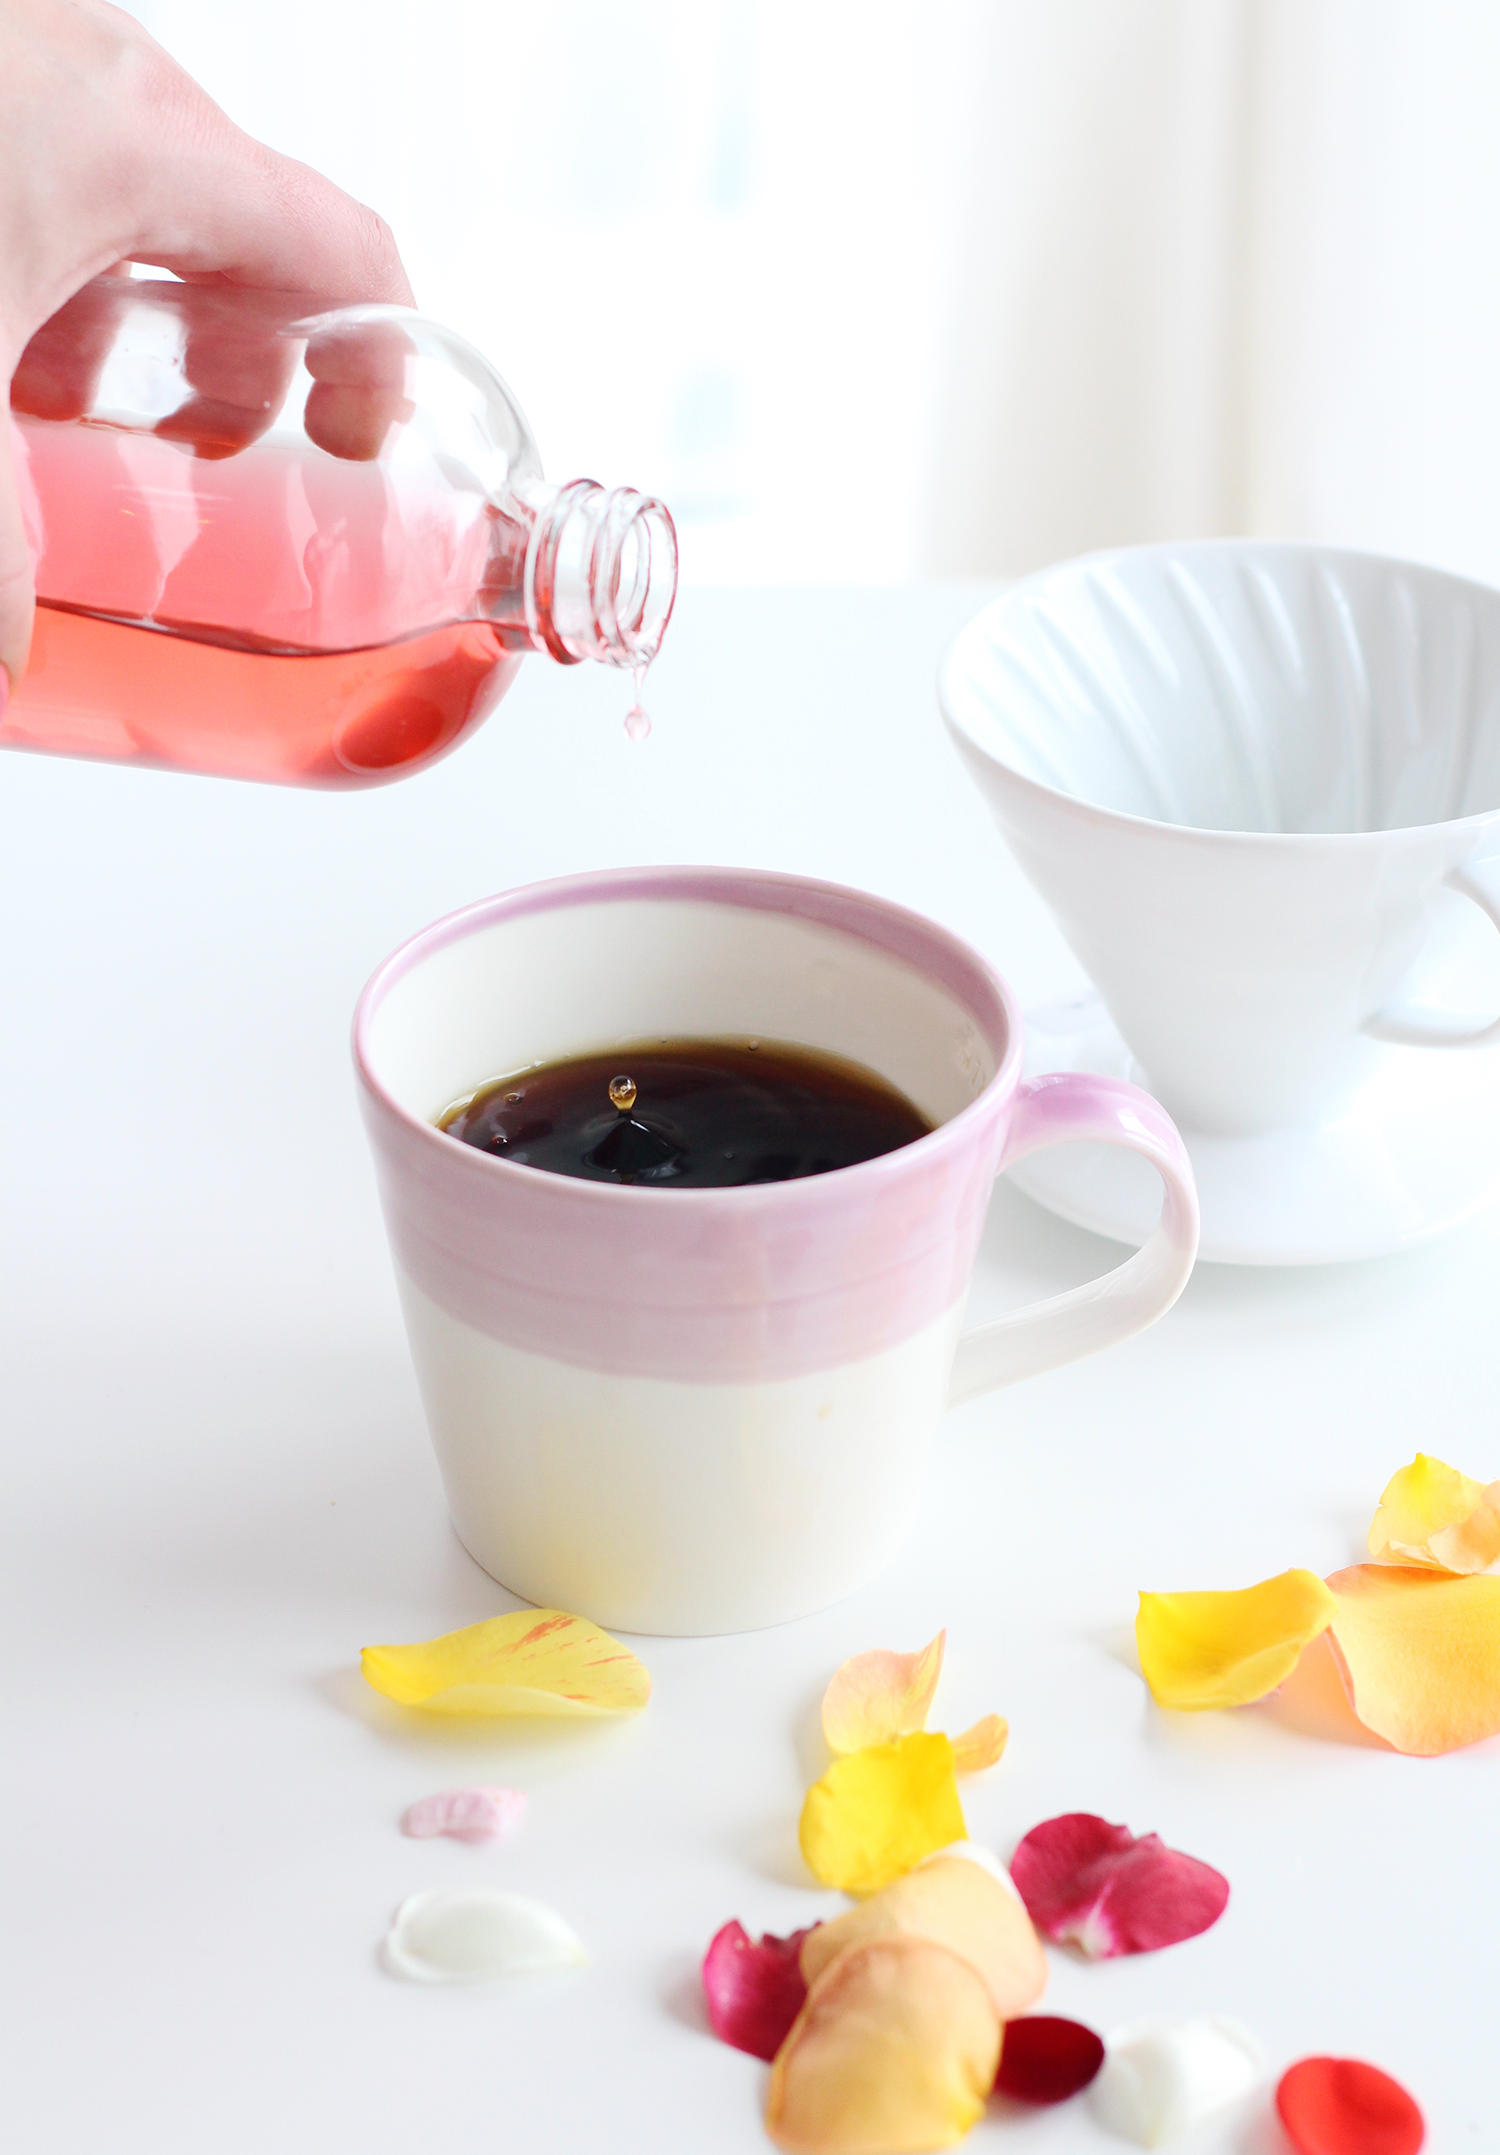 Homemade rose simple syrup is perfect for adding to coffee, tea or cocktails